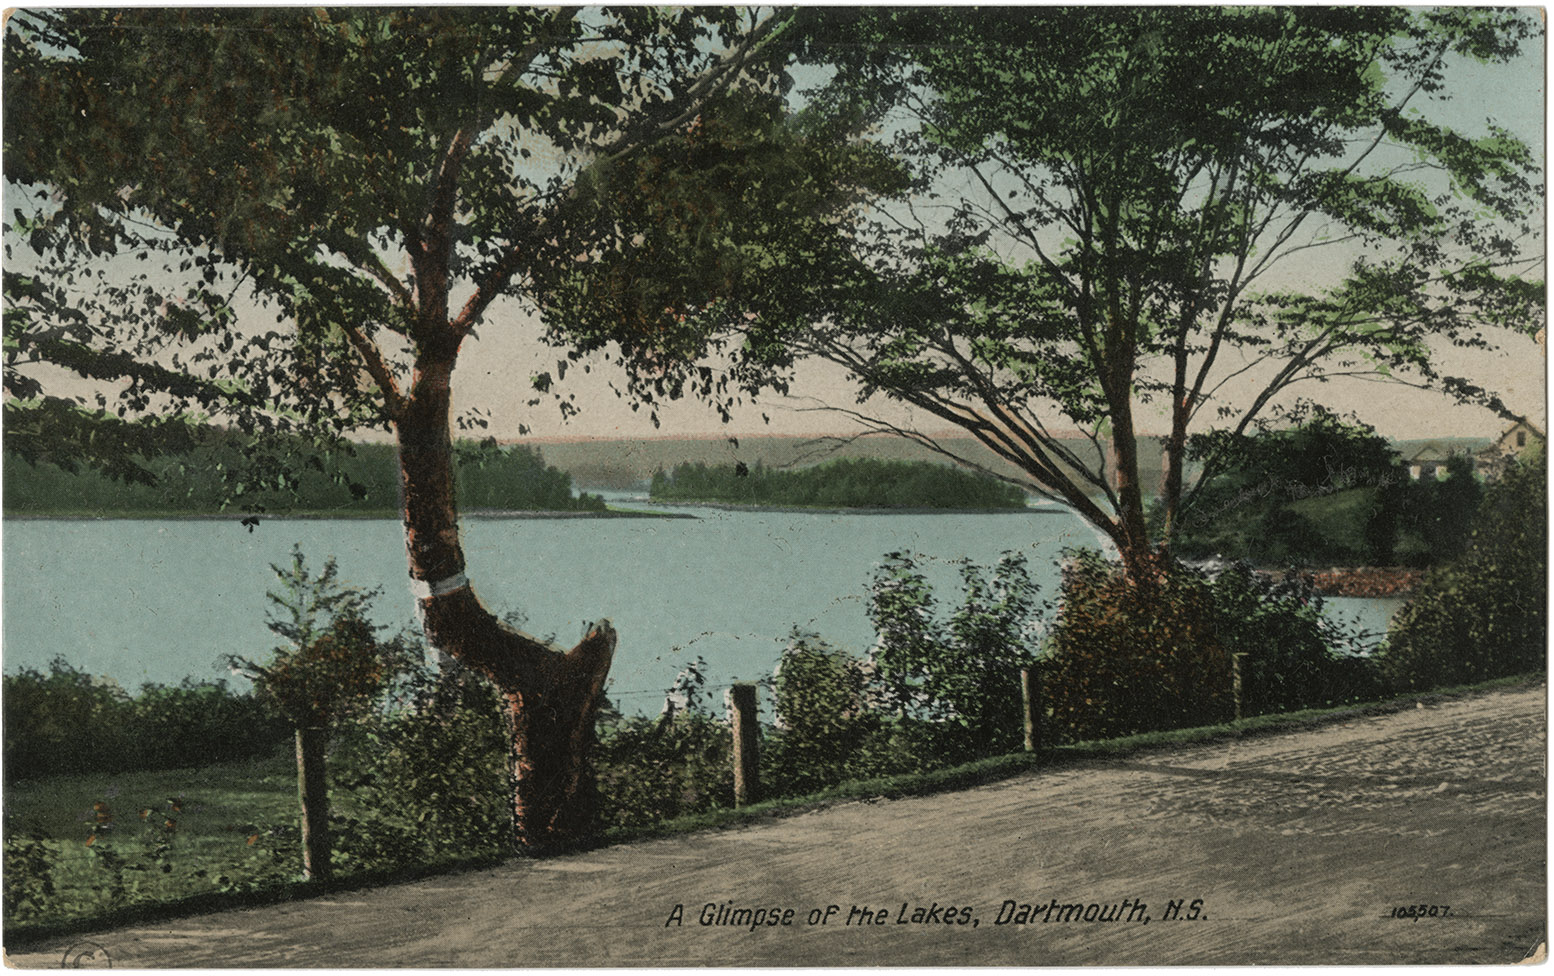 communityalbums - A Glimpse of the Lakes, Dartmouth, N.S.